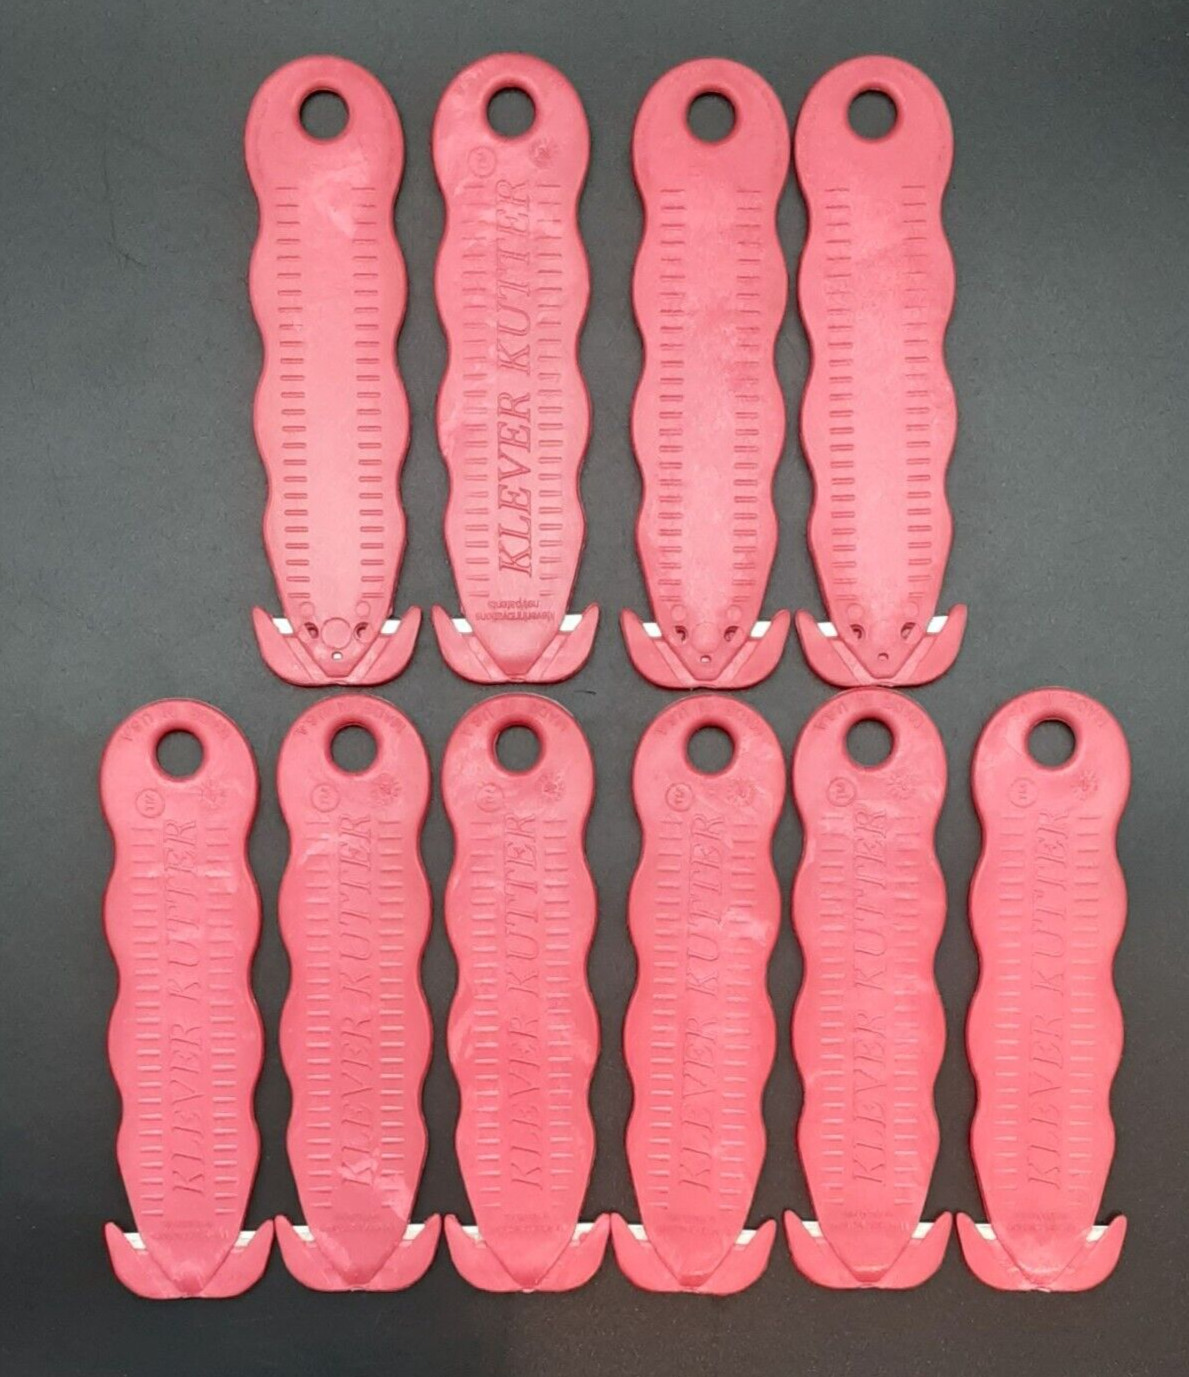 NEW, Set of 10 Red KLEVER KUTTER Safety Box Cutters